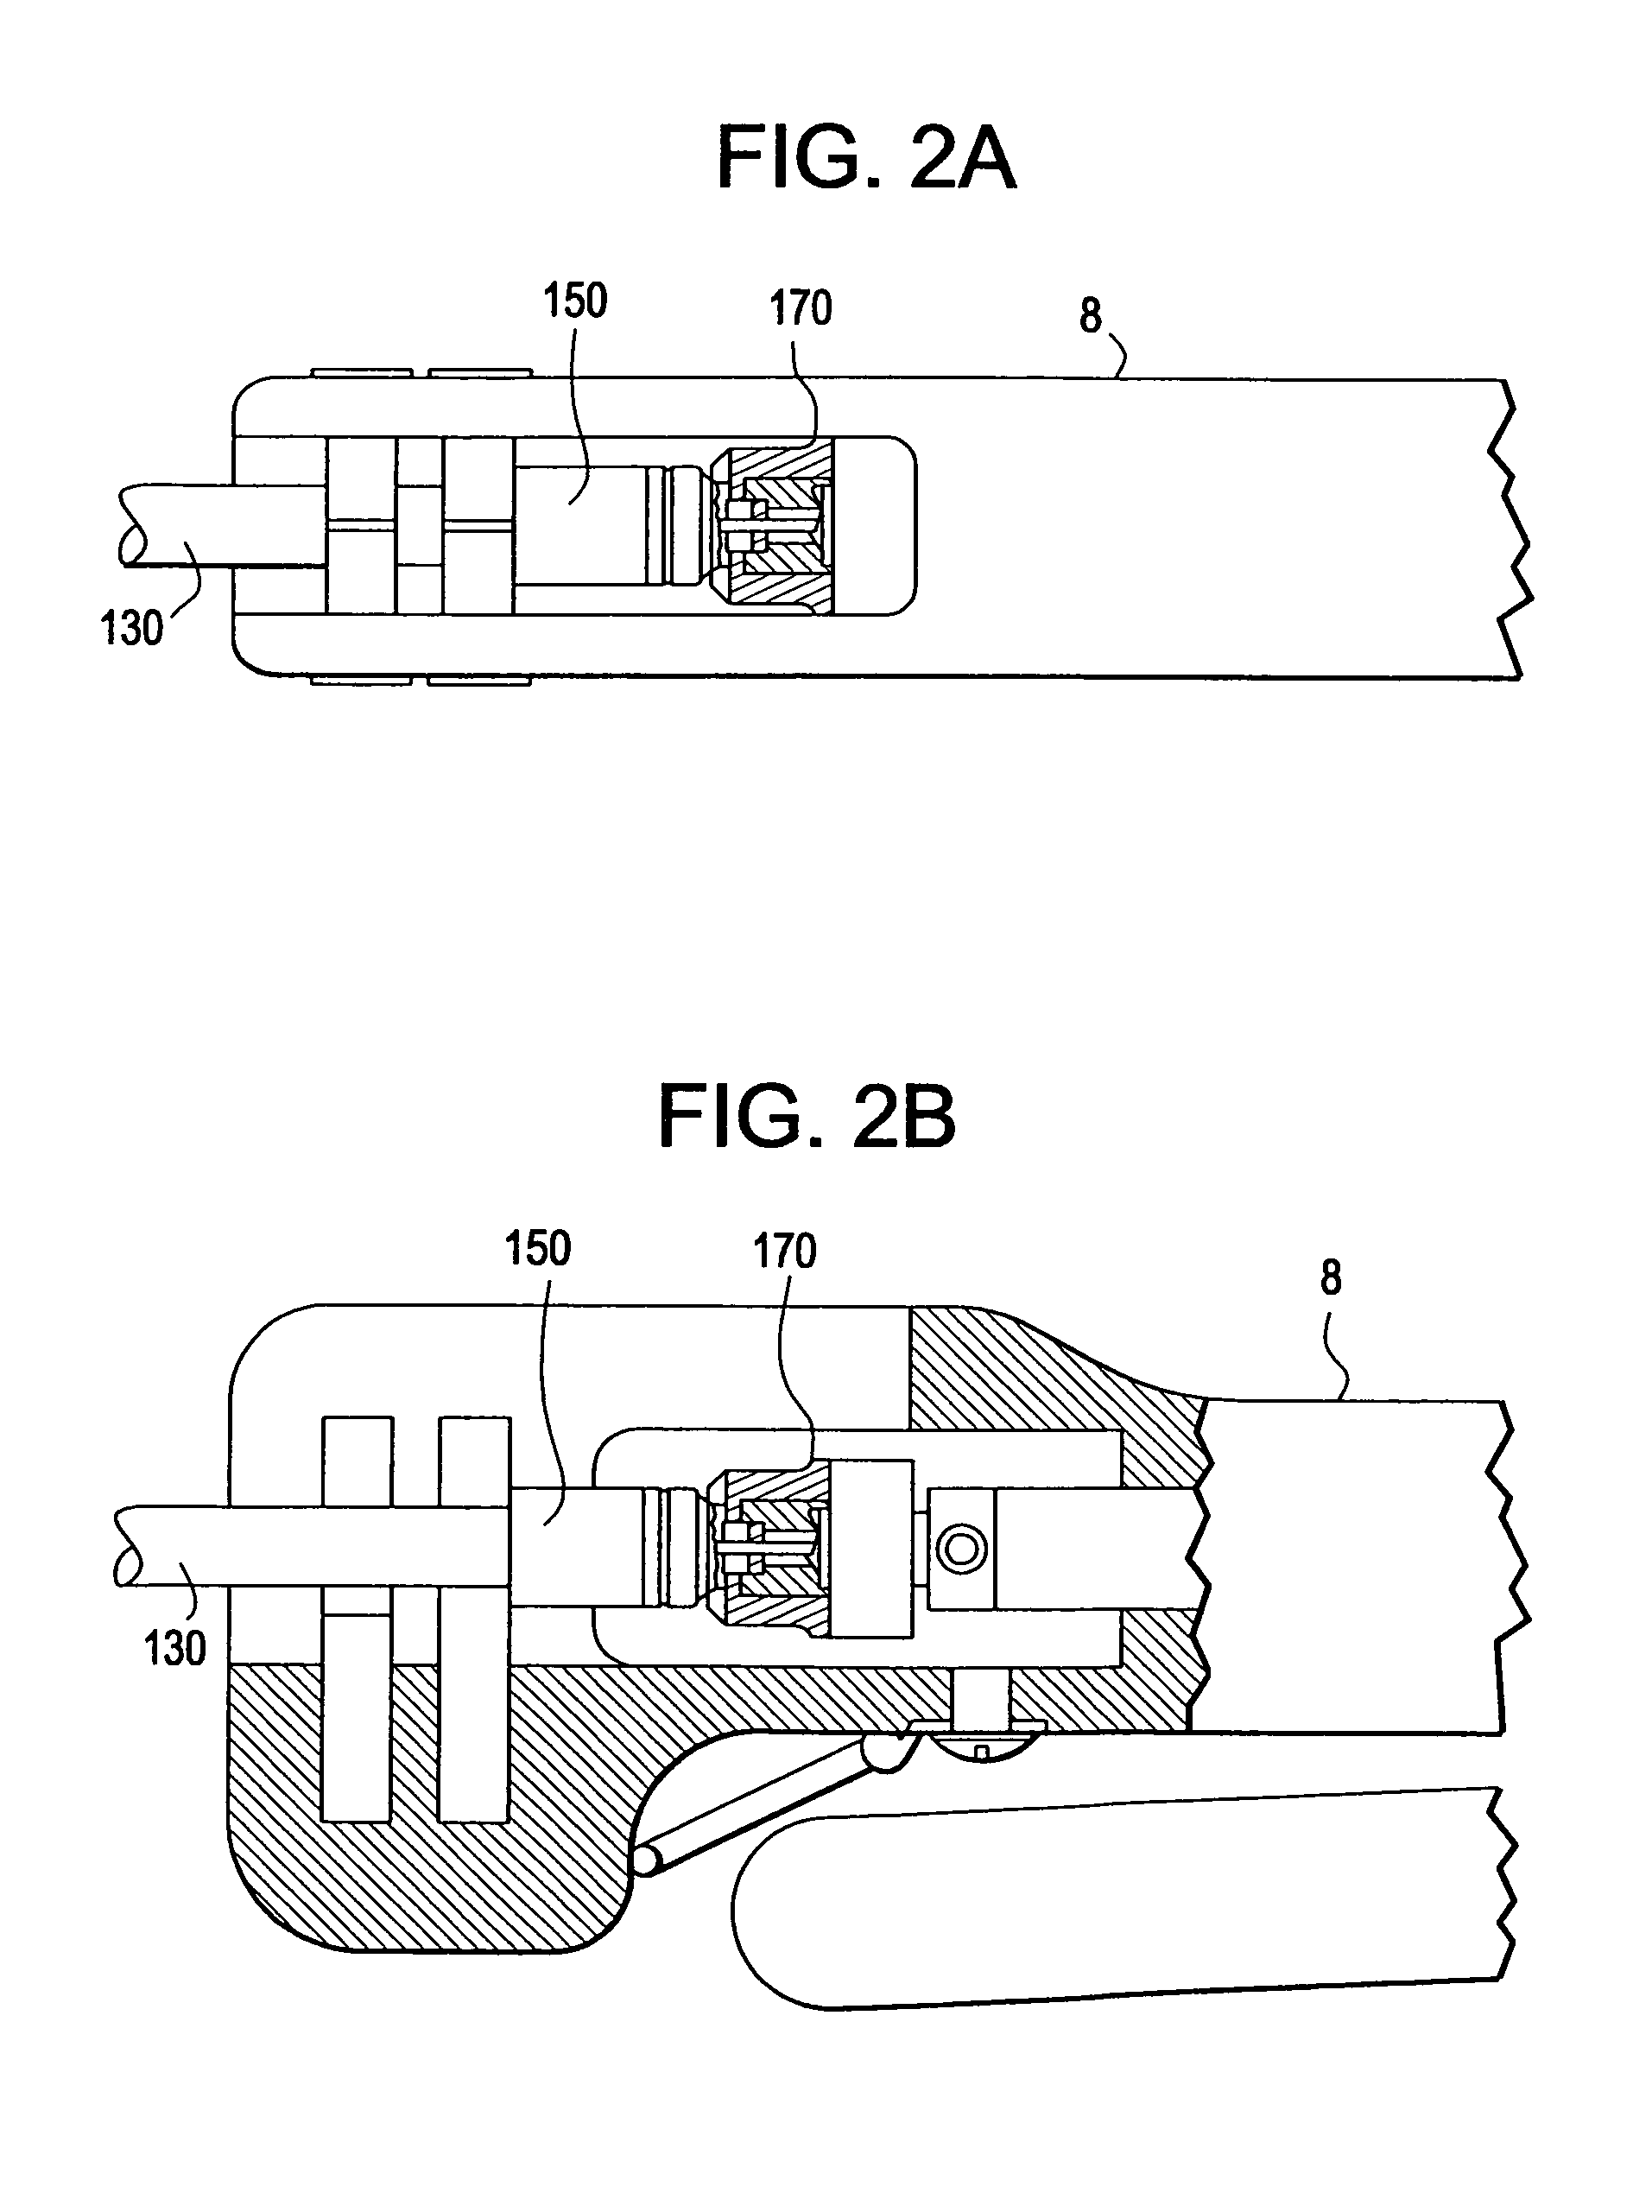 Seals and methods for sealing coaxial cable connectors and terminals